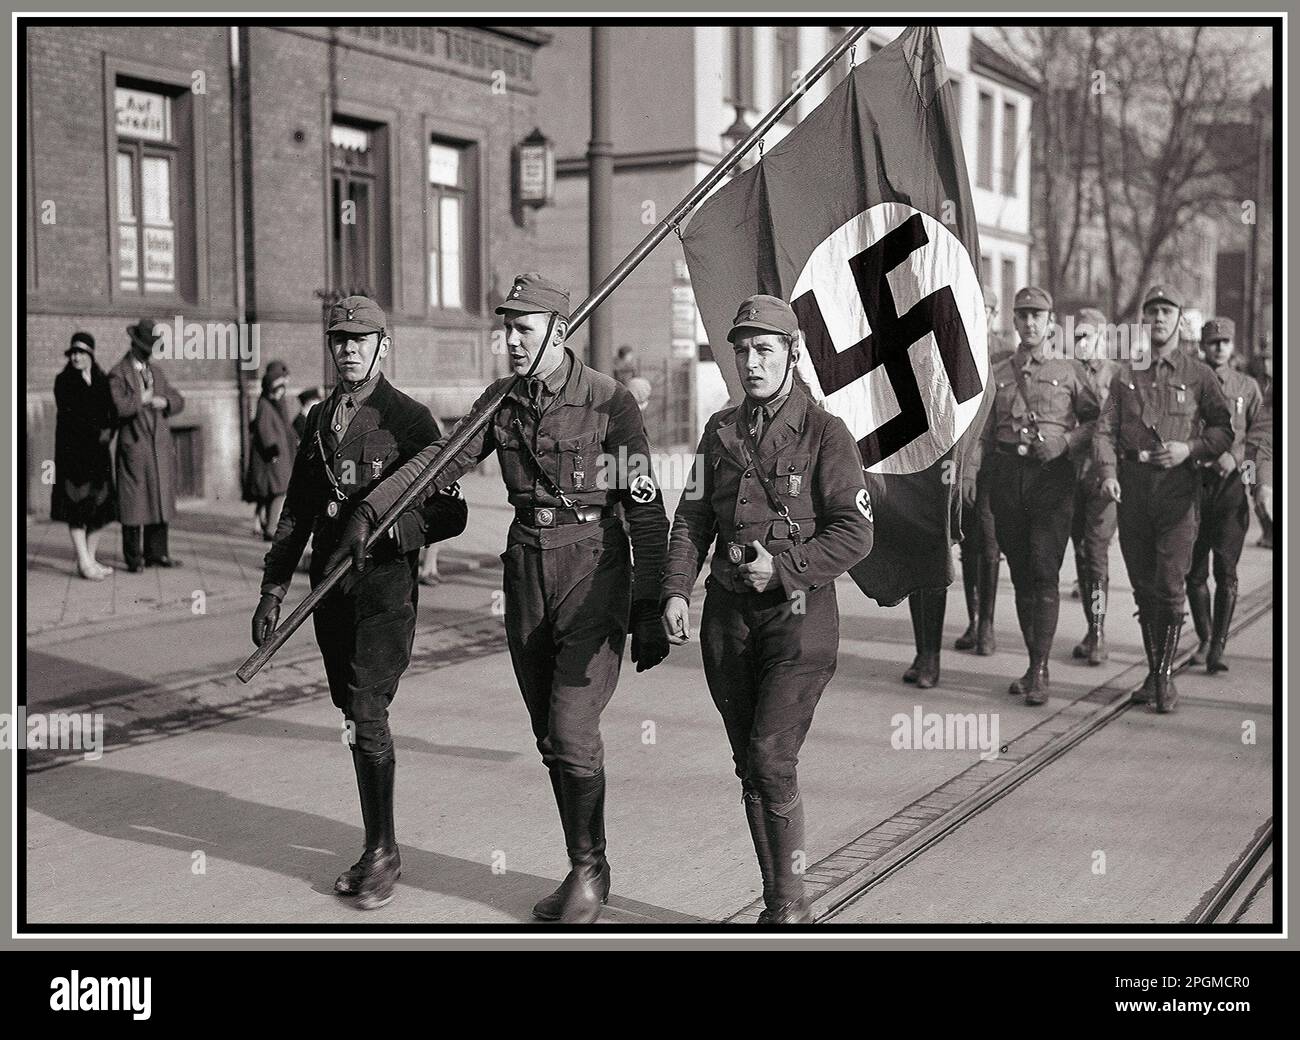 German Nazi SA men in parade, Braunschweig, Apr 1932  Nazi Germany with Swastika Flag carrying SA paramilitary Nazi Sturmabteilung uniformed men march through a German town in 1932 Nazi Germany Stock Photo